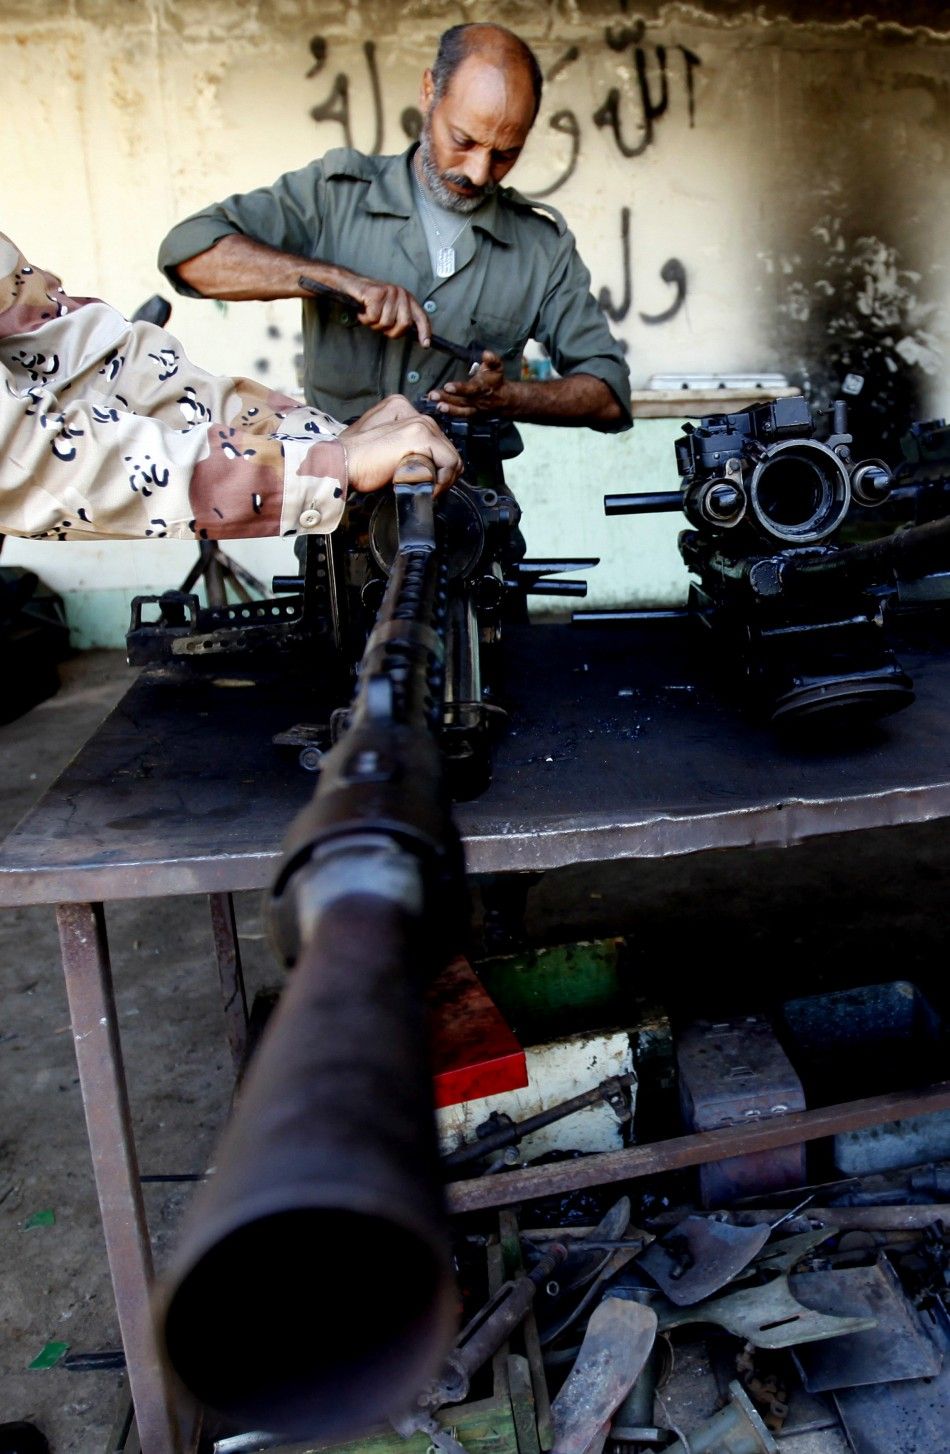 A rebel army officer fixes weapons taken from forces loyal to Libyan leader Muammar Gaddafi at a workshop in Benghaz